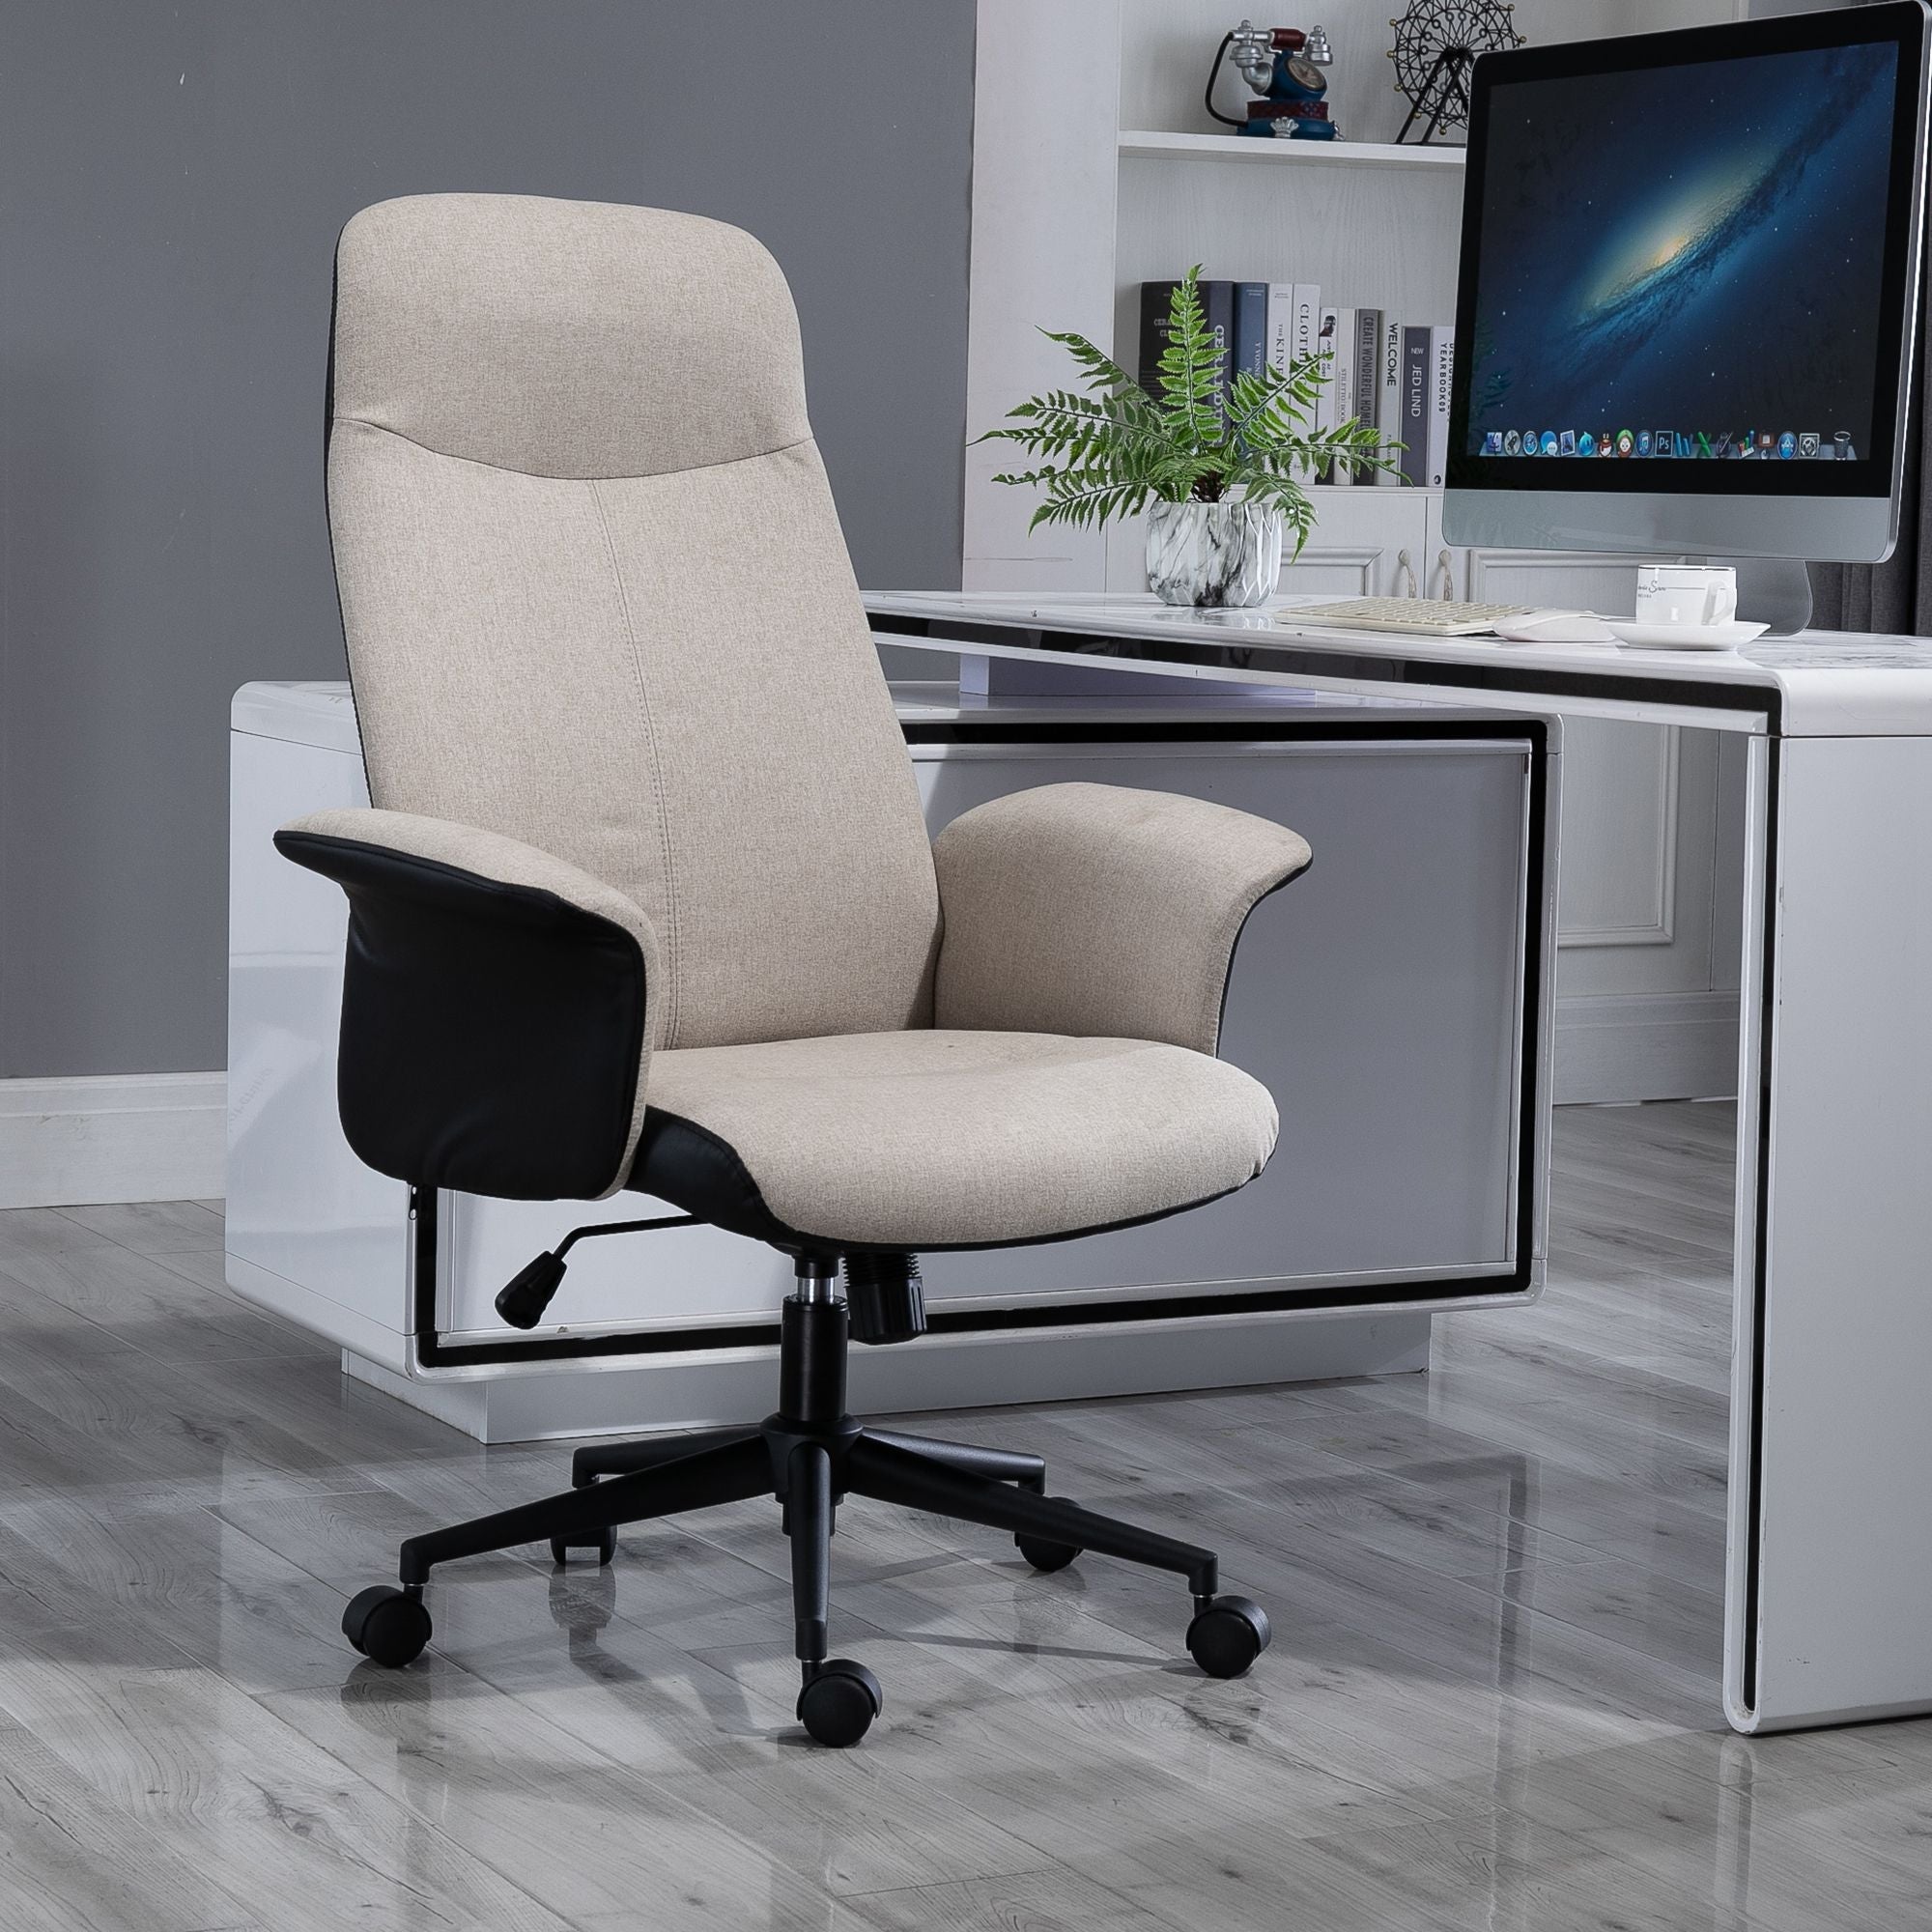 Vinsetto High Back Office Chair, Linen Fabric Computer Desk Chair with Armrests, Tilt Function, Adjustable Seat Height, Beige - TovaHaus